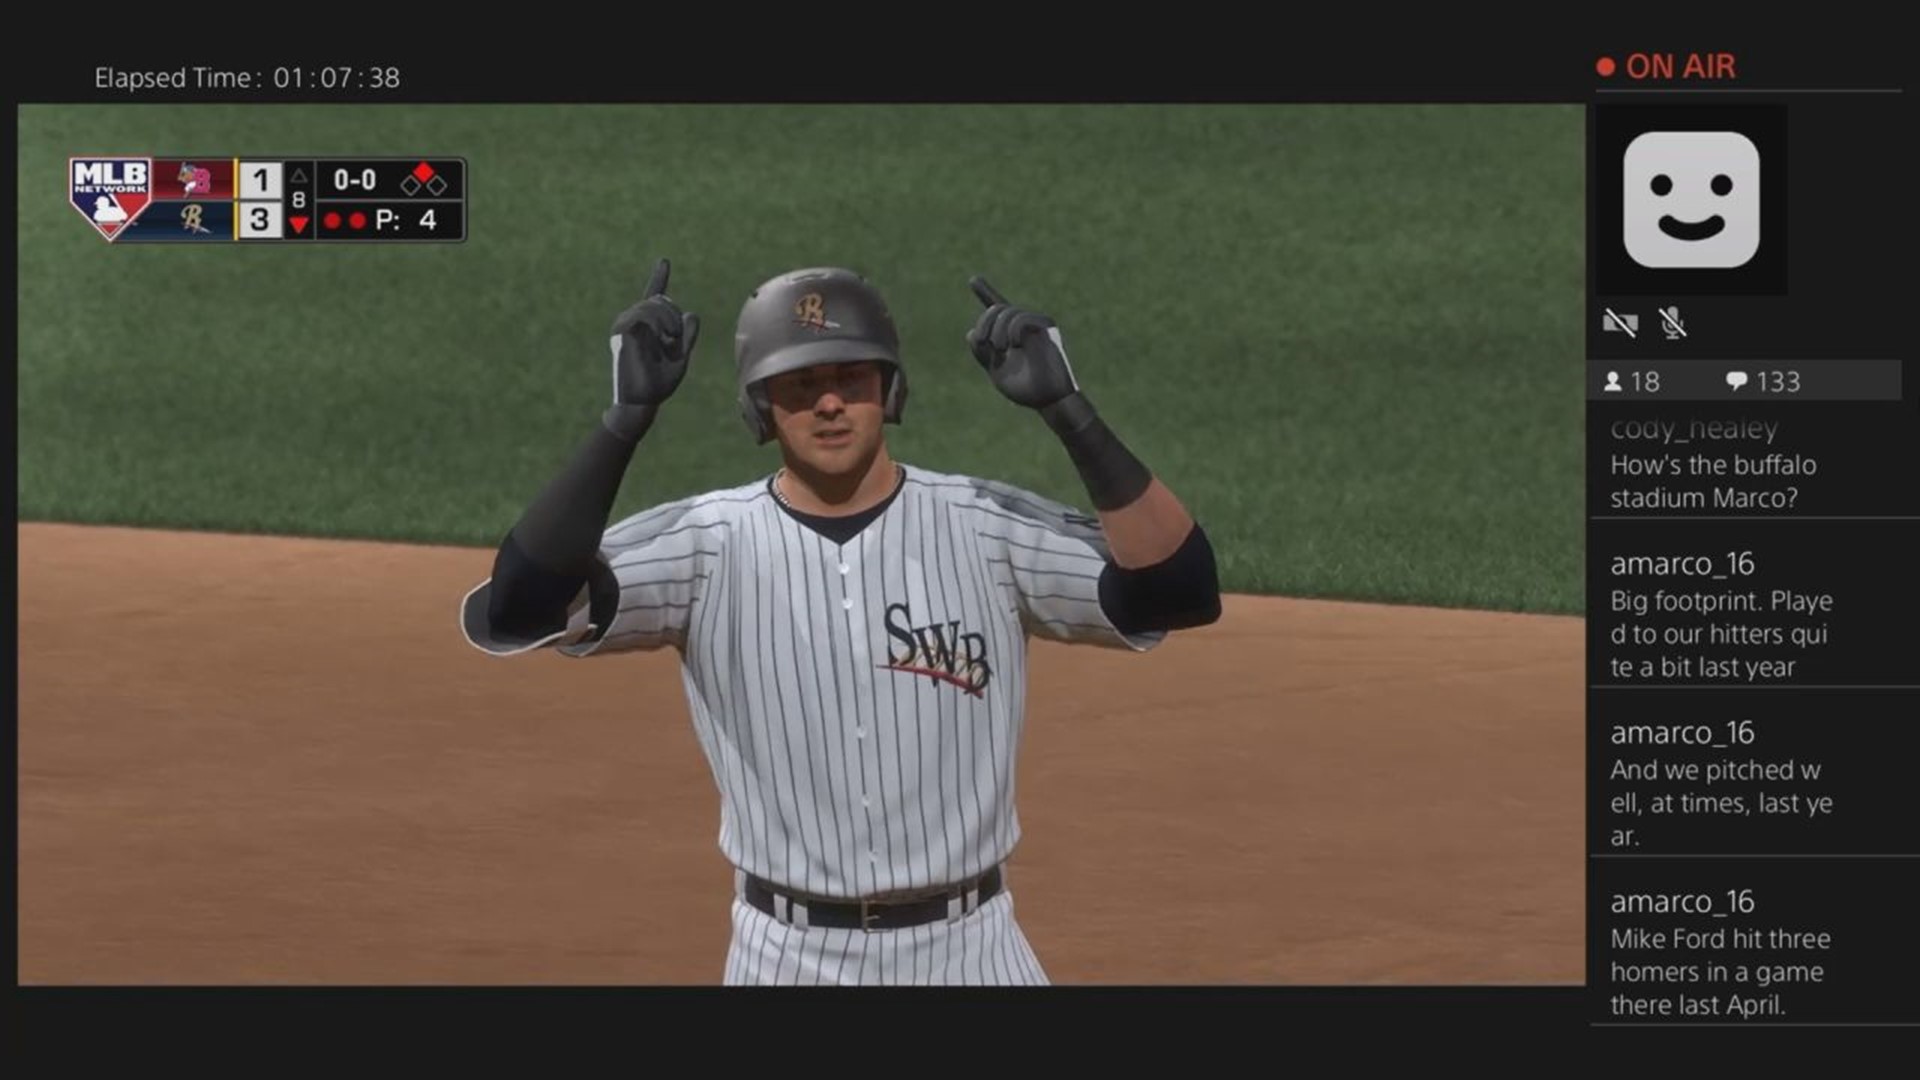 SWB Director of Group Sales Playing for the RailRiders Over PS4 and Twitch